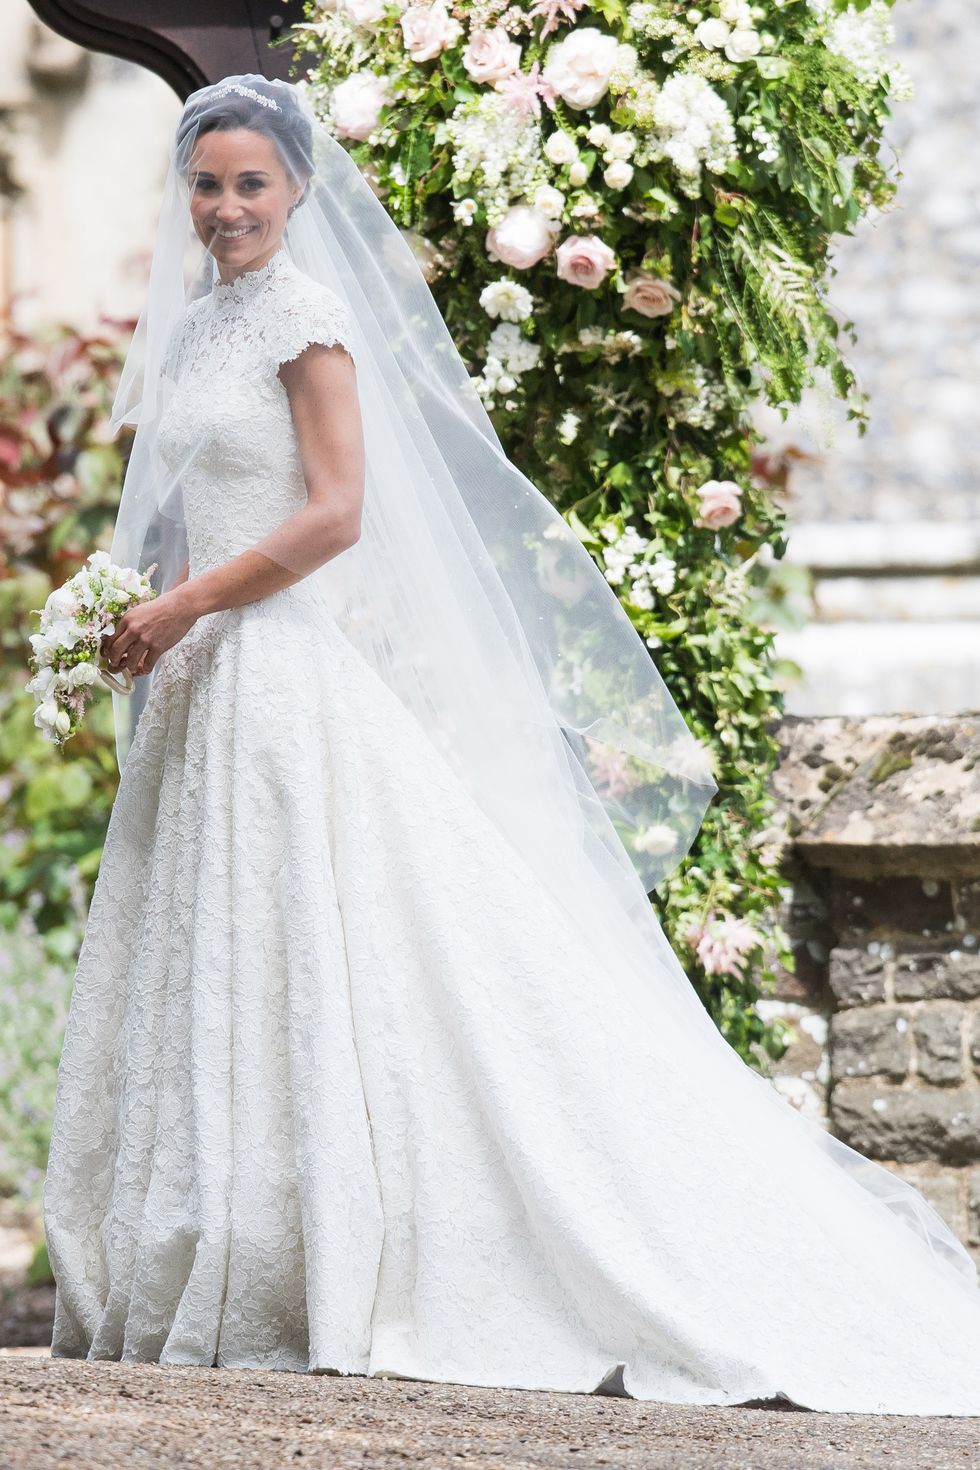 Most Iconic Celebrity Wedding Dresses of the Millennial Generation